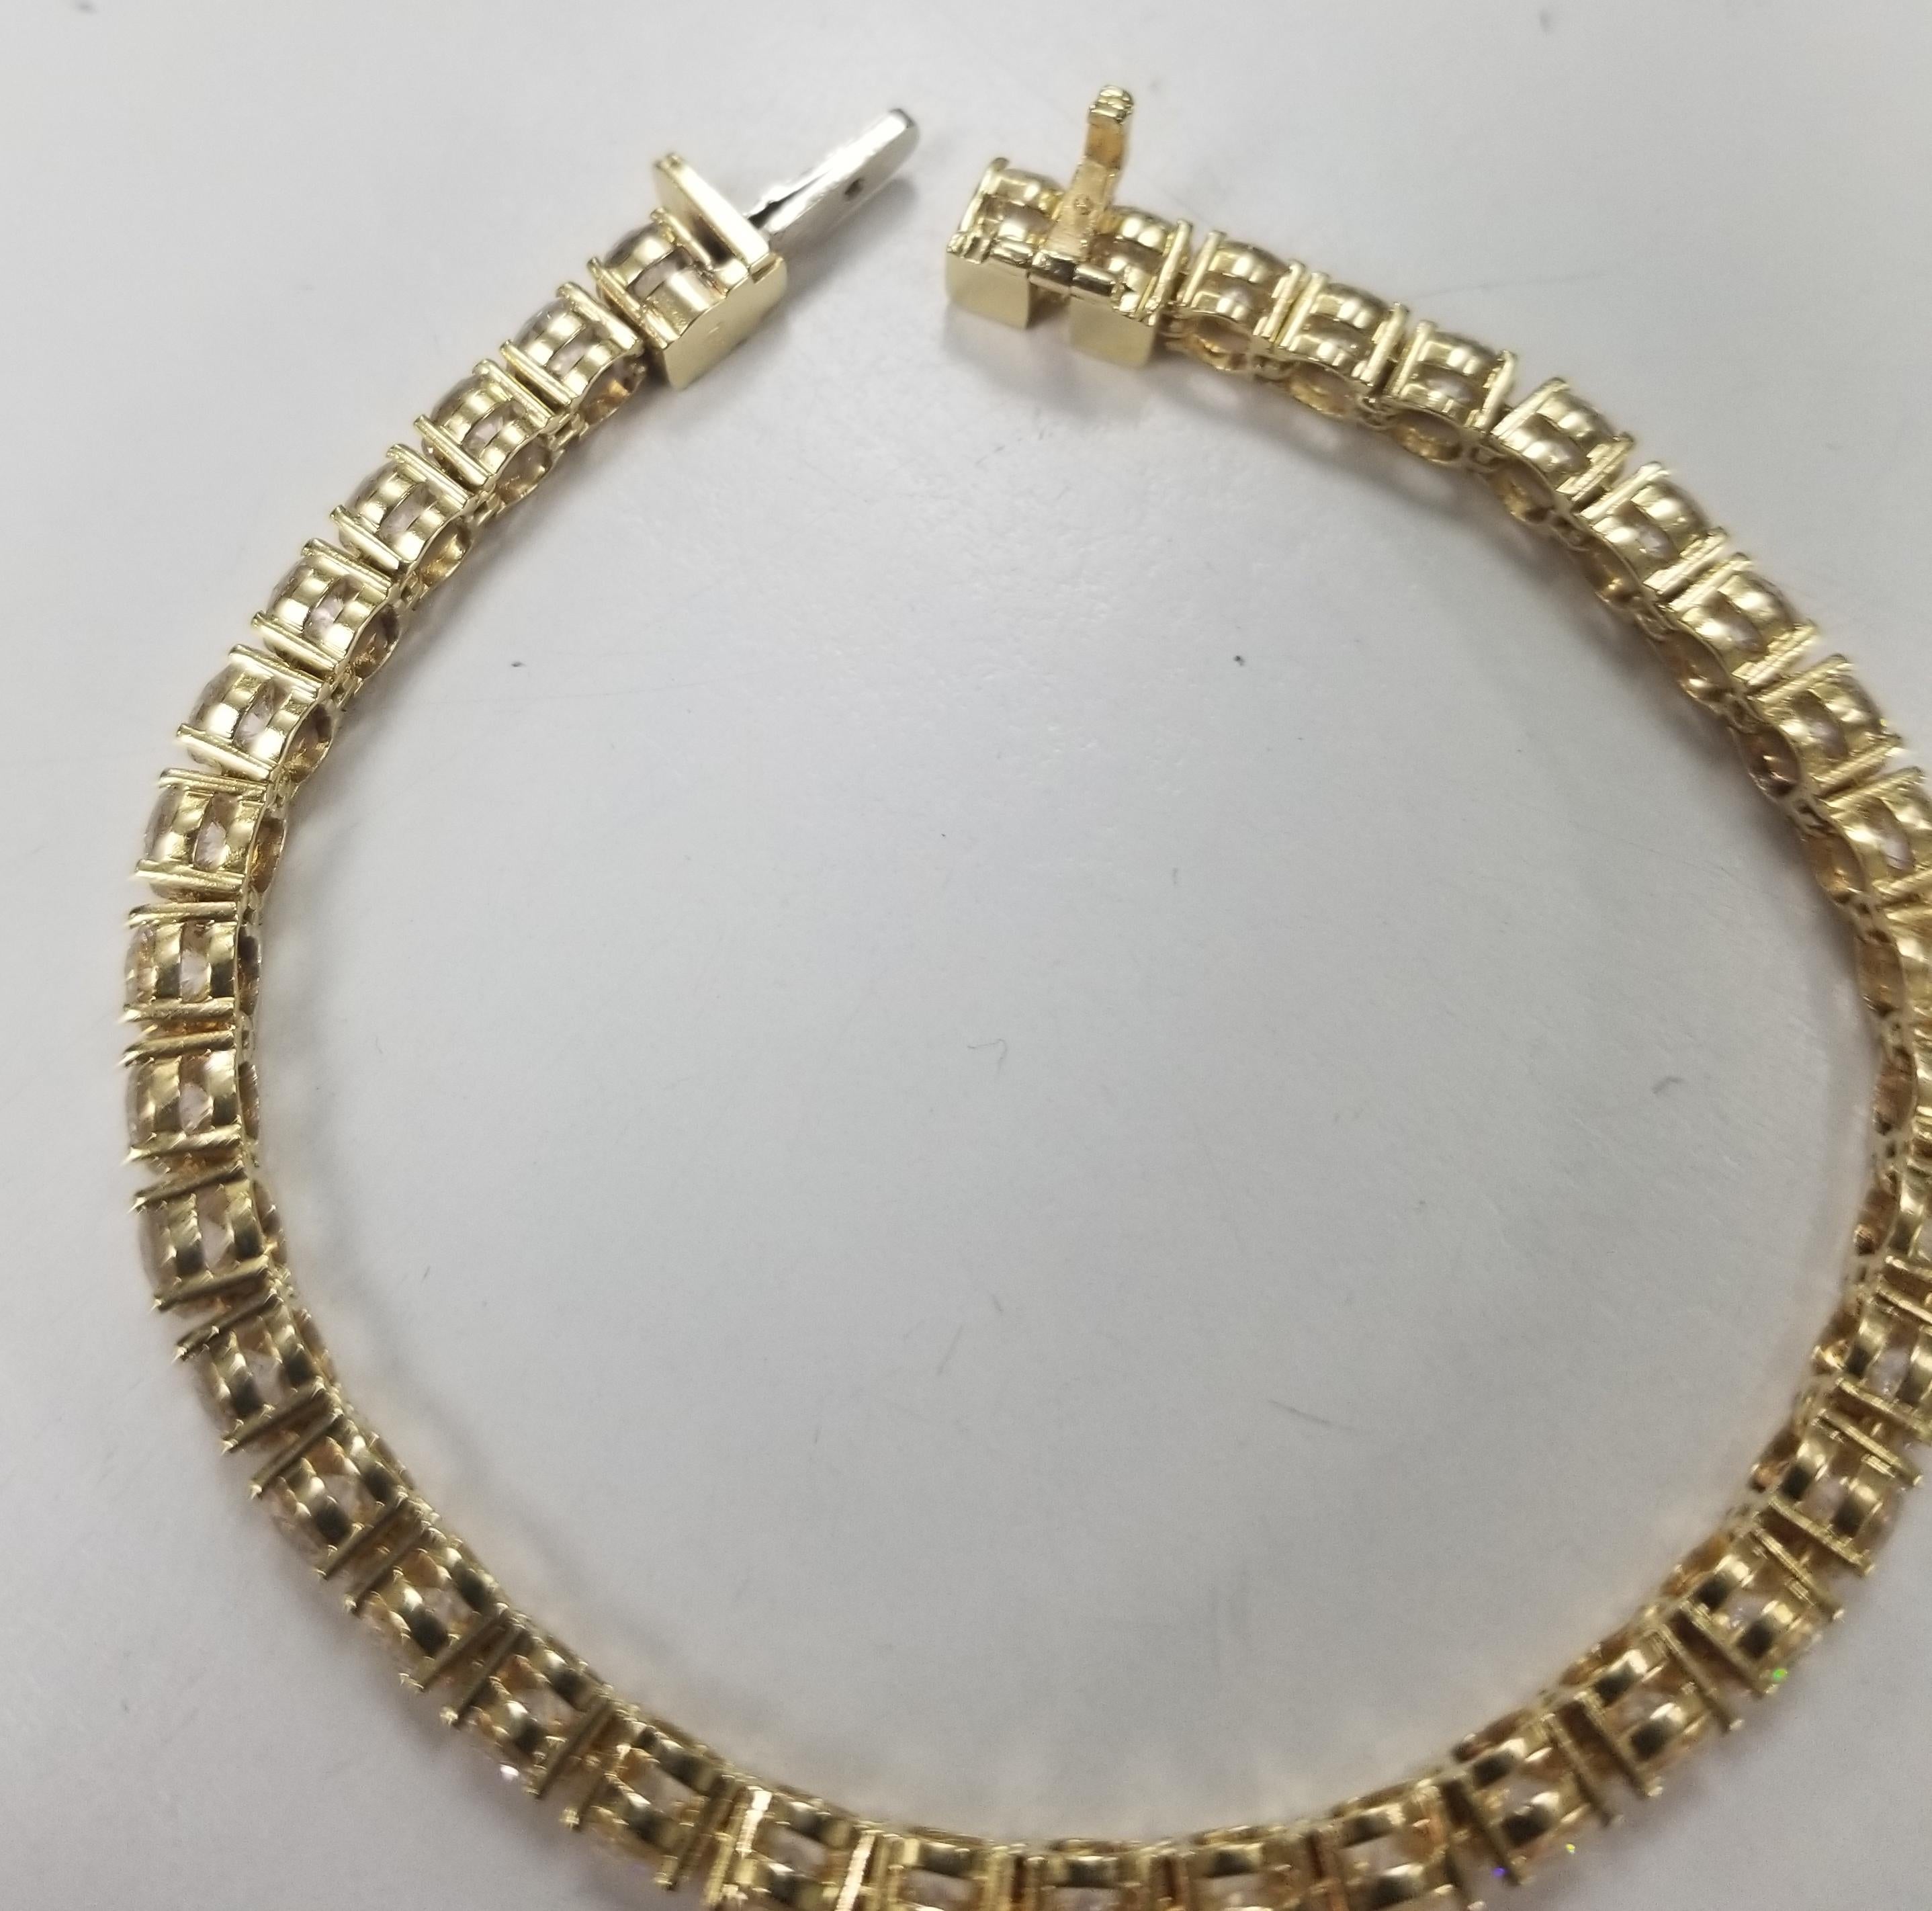 This is very beautiful 18k yellow gold custom made tennis bracelet with 38 round diamonds color F and clarity VS2-SI1 weighing 9.50cts. very fine quality diamonds, bracelet measures 6 inches with clasp and safety.
Specifications:
    main stone: